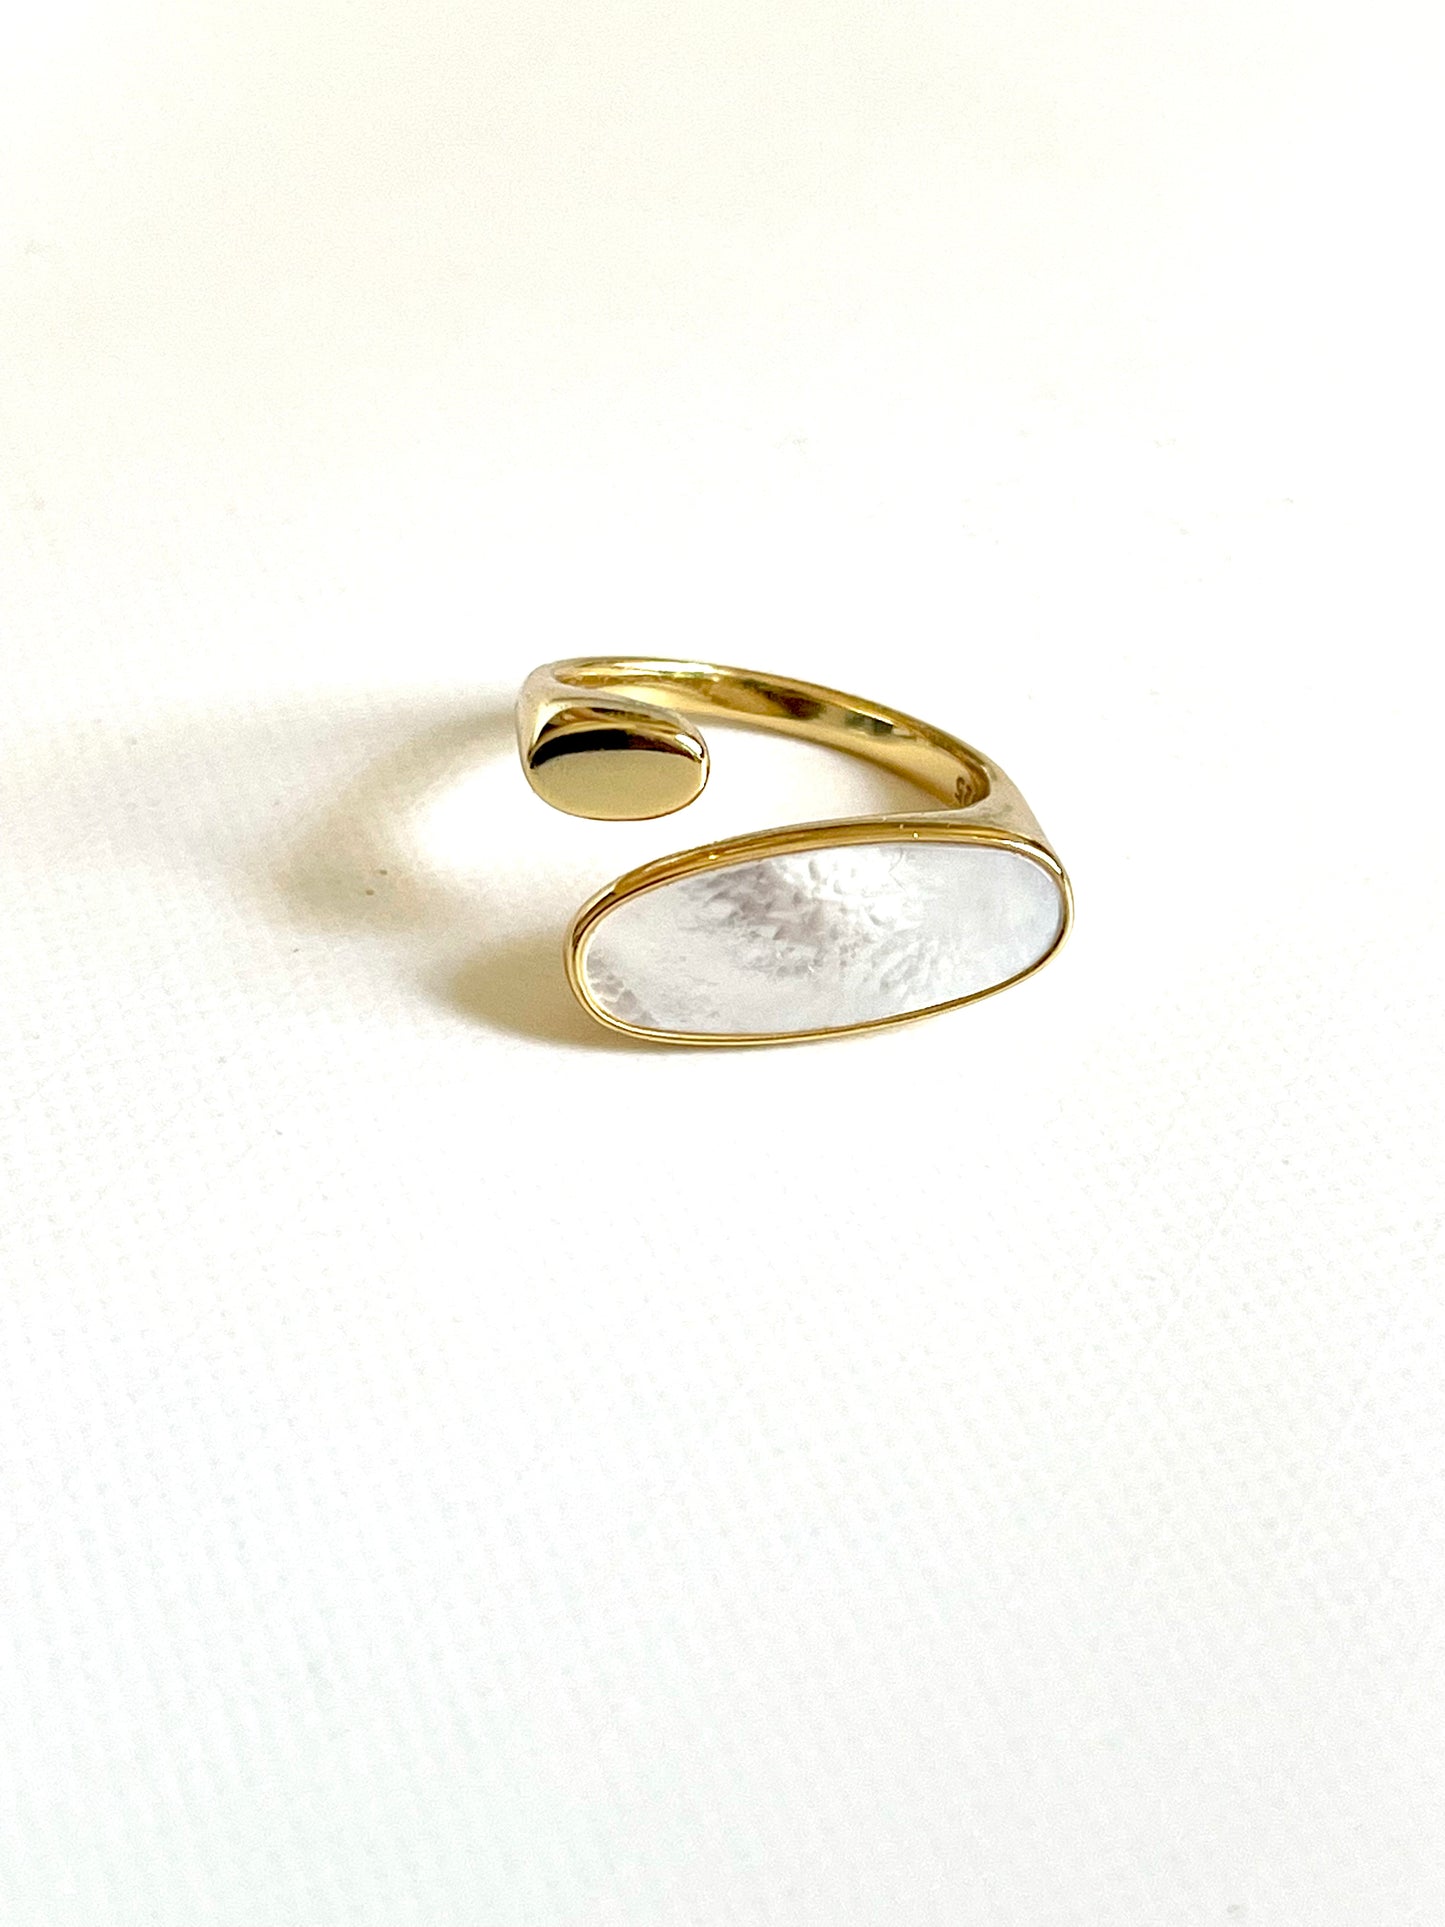 Stackable Faith and Hope rings